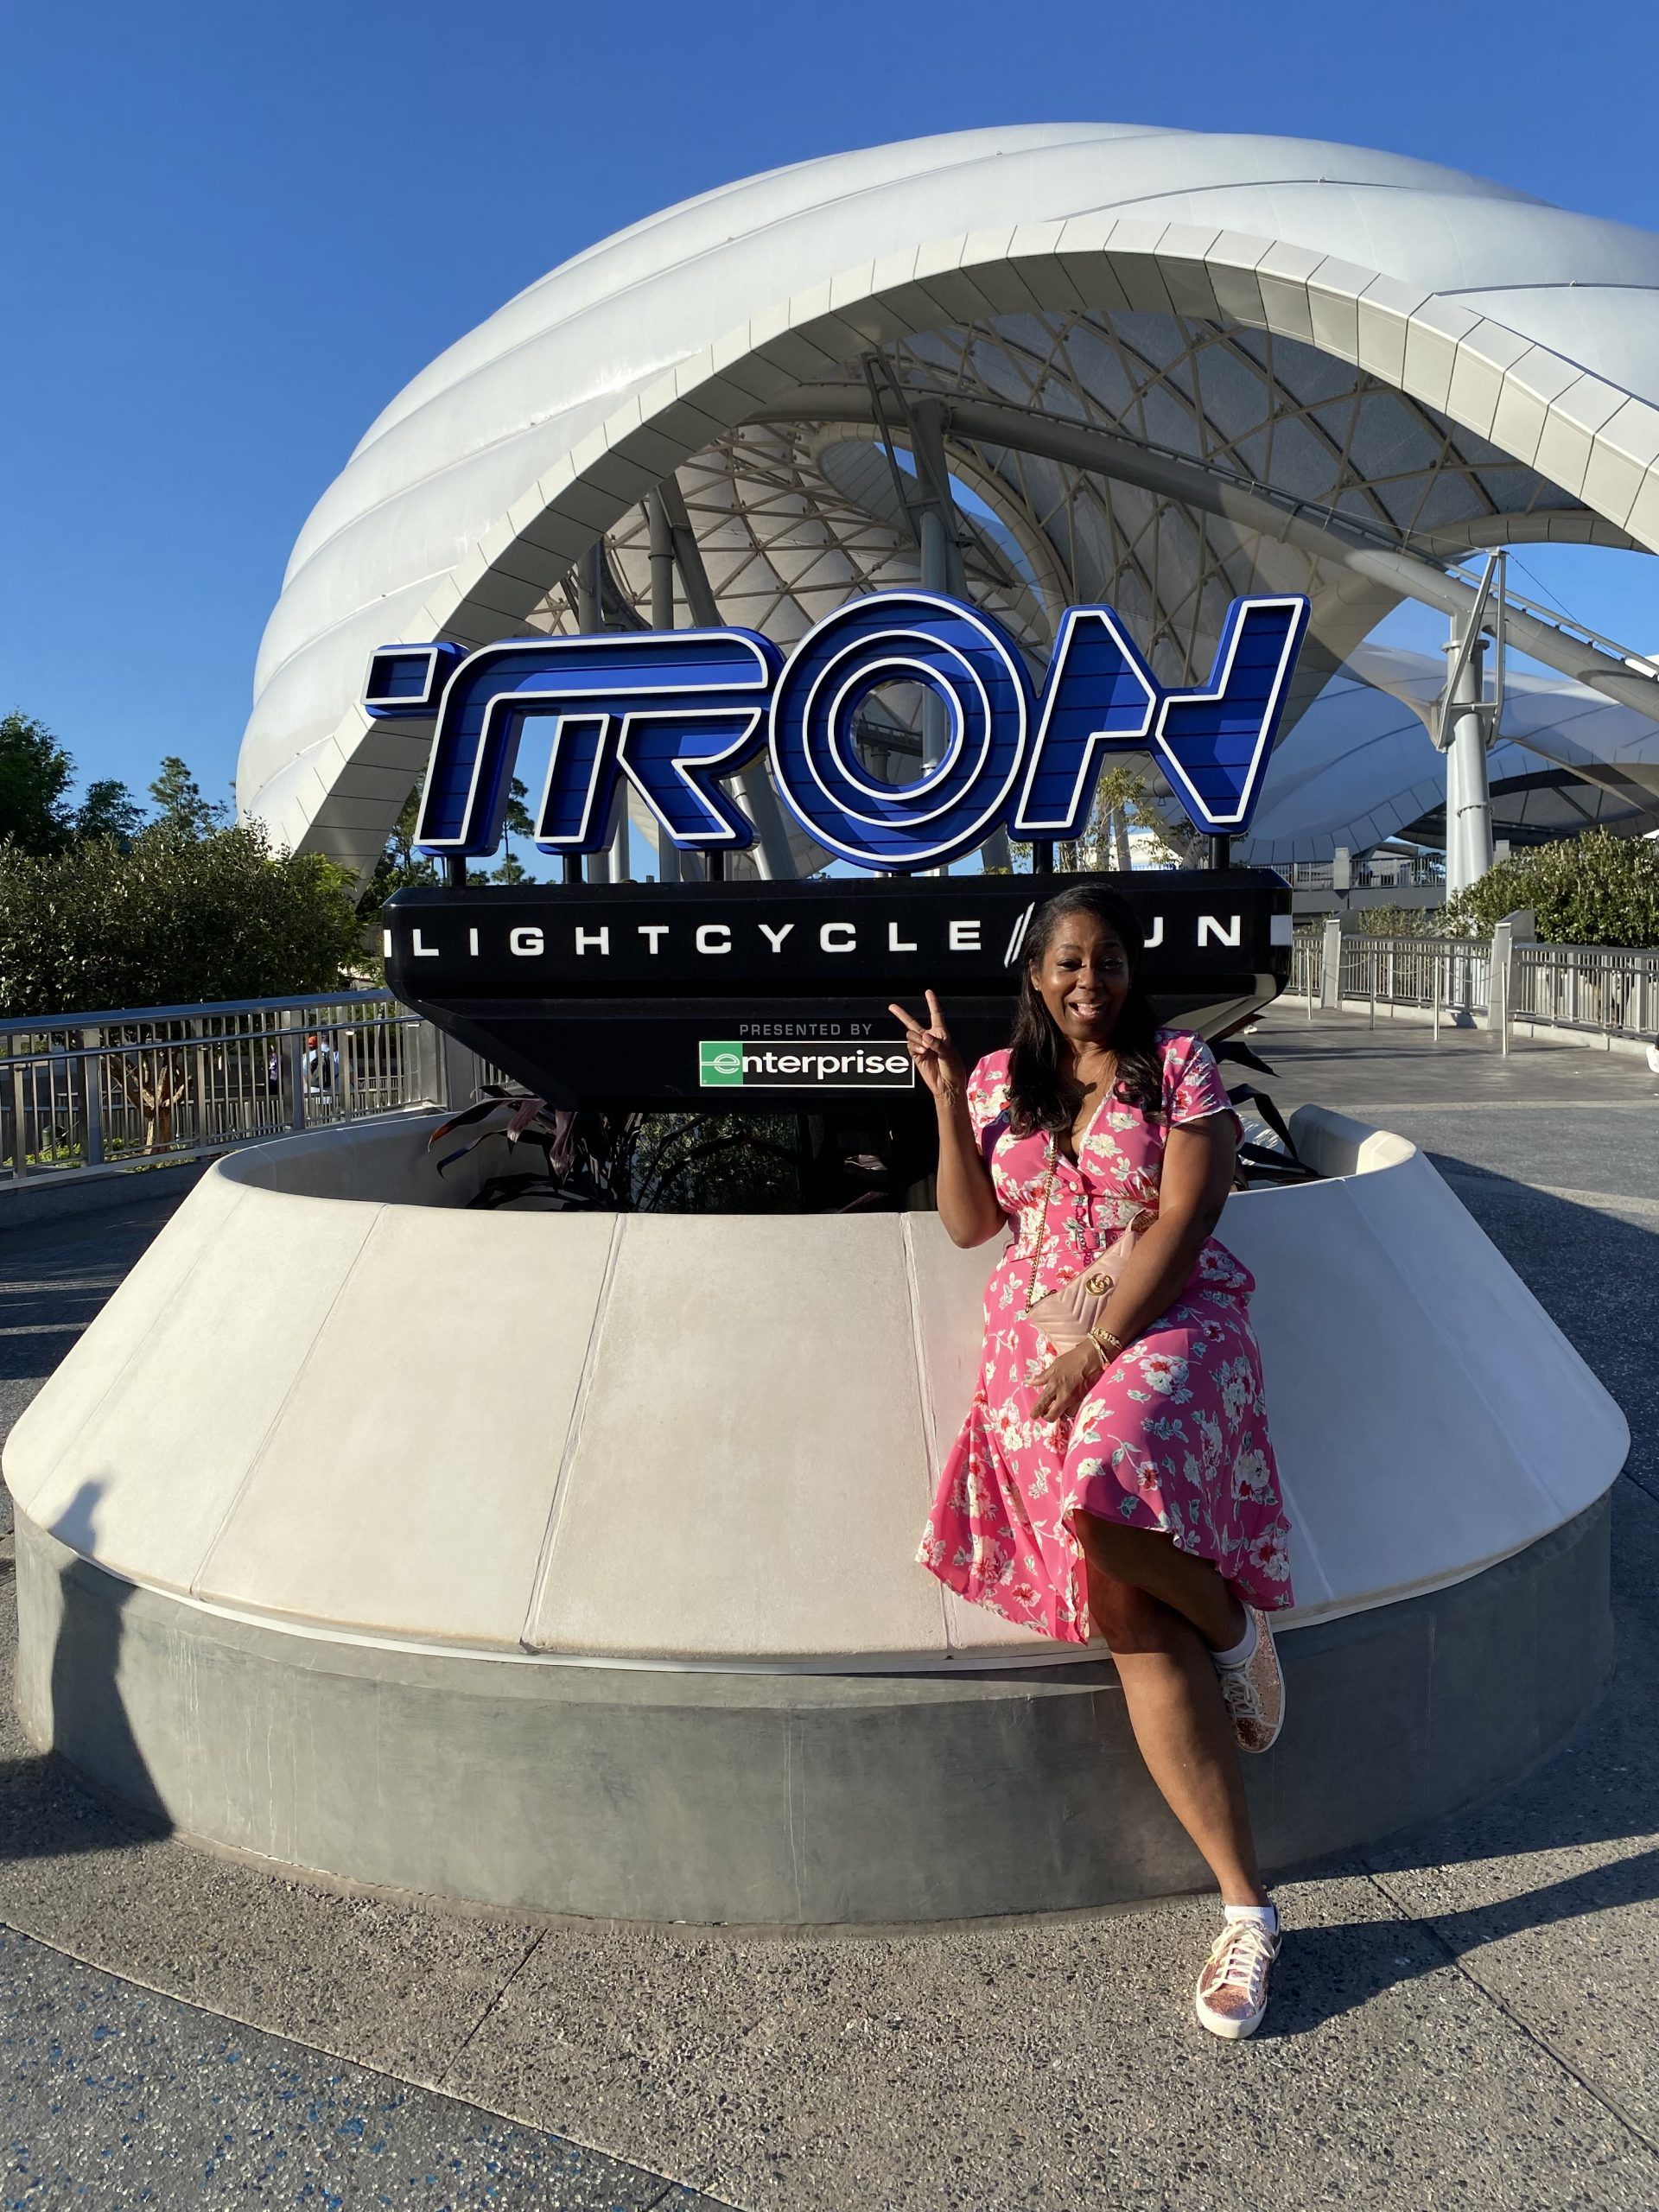 Five Things You Will Love About Tron: Lightcycle/Run At Walt Disney World